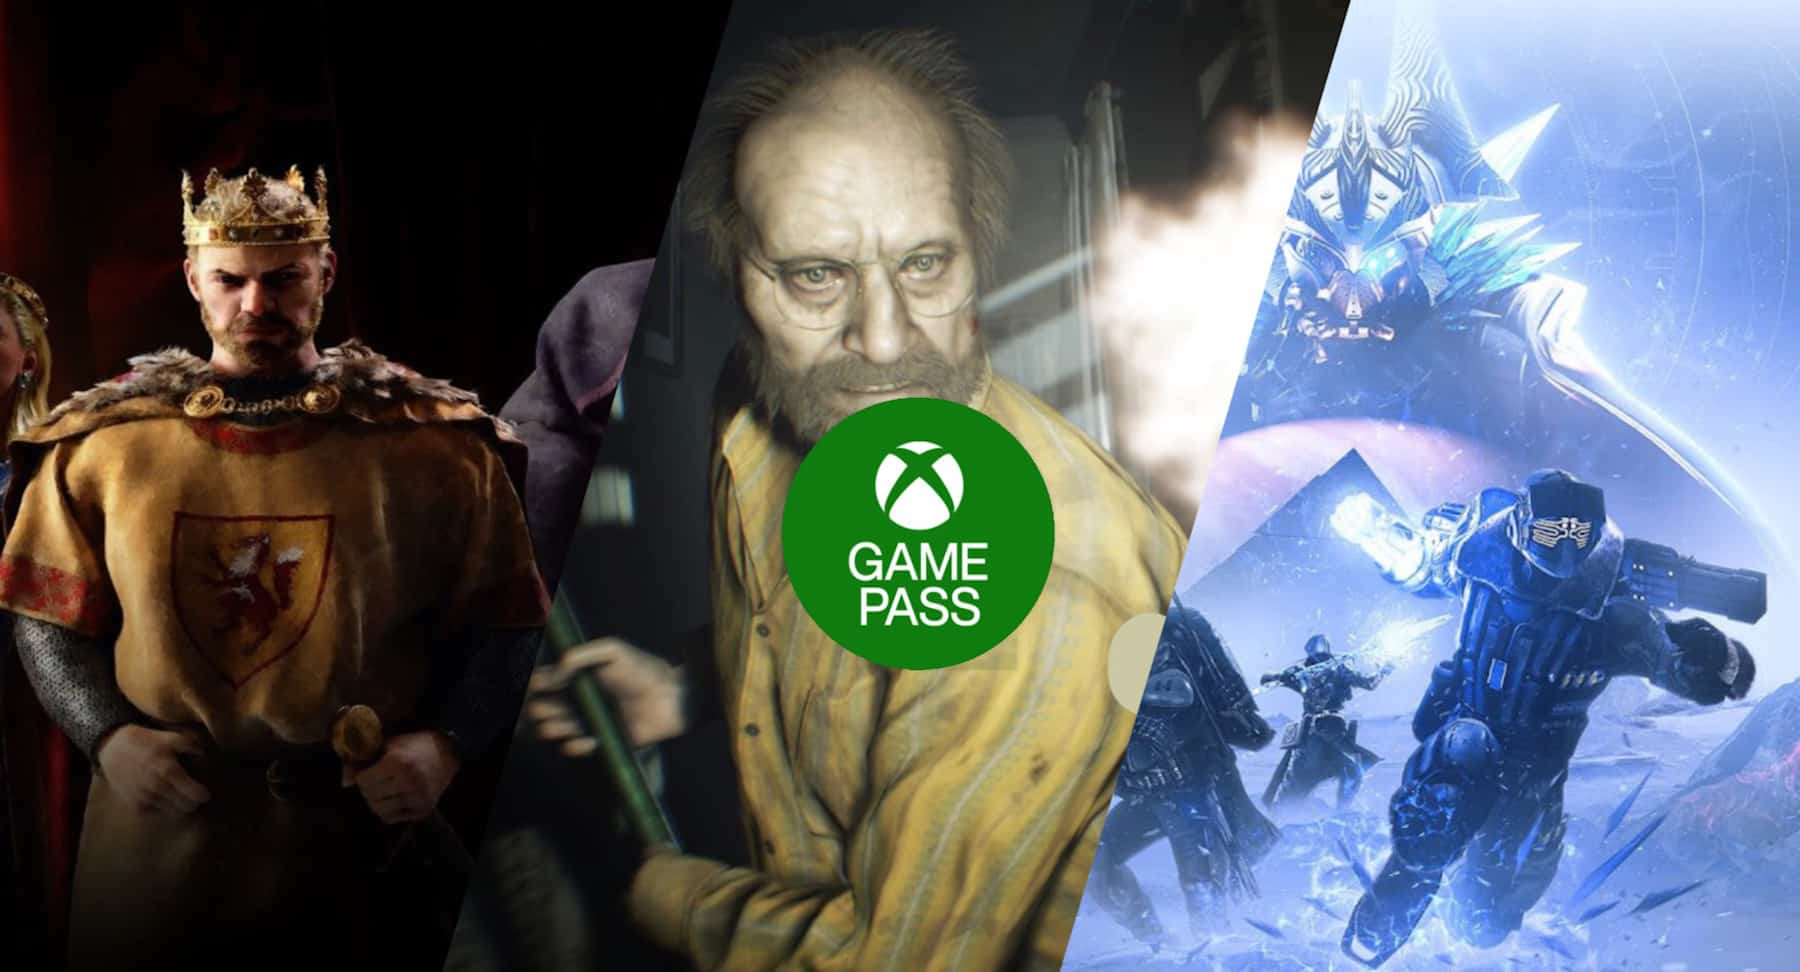 Resident Evil 7, Crusader Kings 3 and more are Game Pass games this month